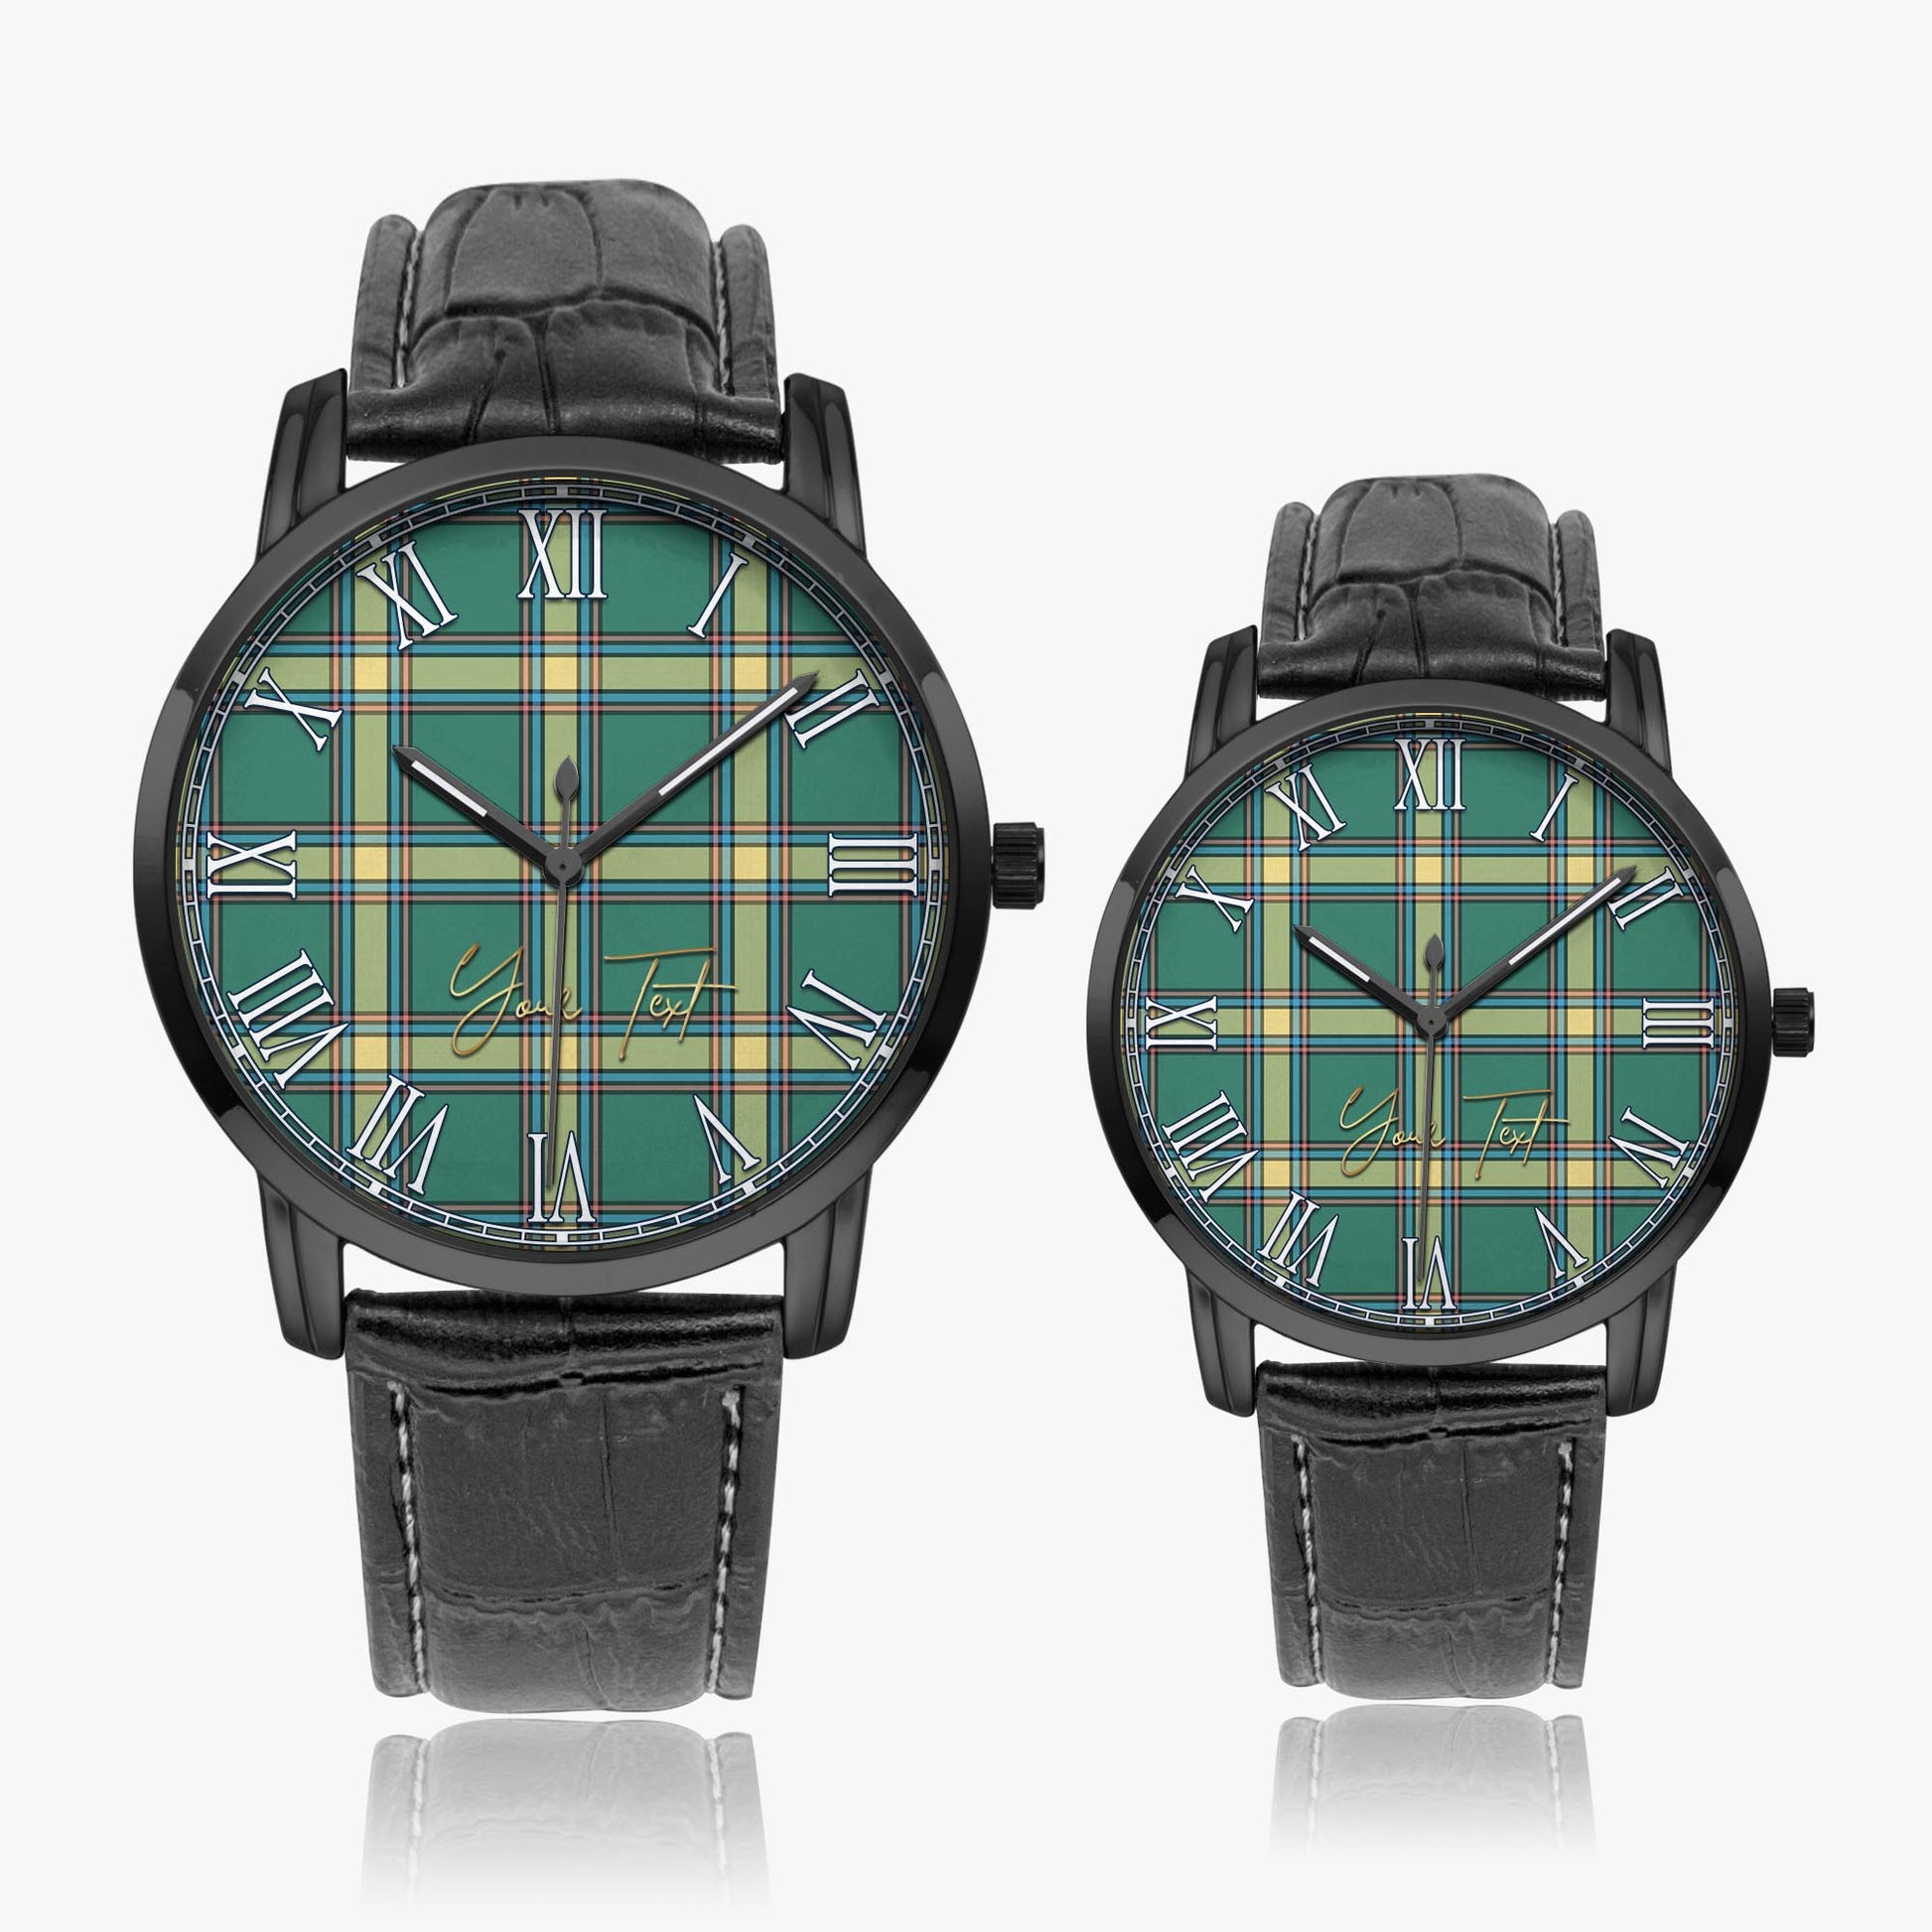 Alberta Province Canada Tartan Personalized Your Text Leather Trap Quartz Watch Wide Type Black Case With Black Leather Strap - Tartanvibesclothing